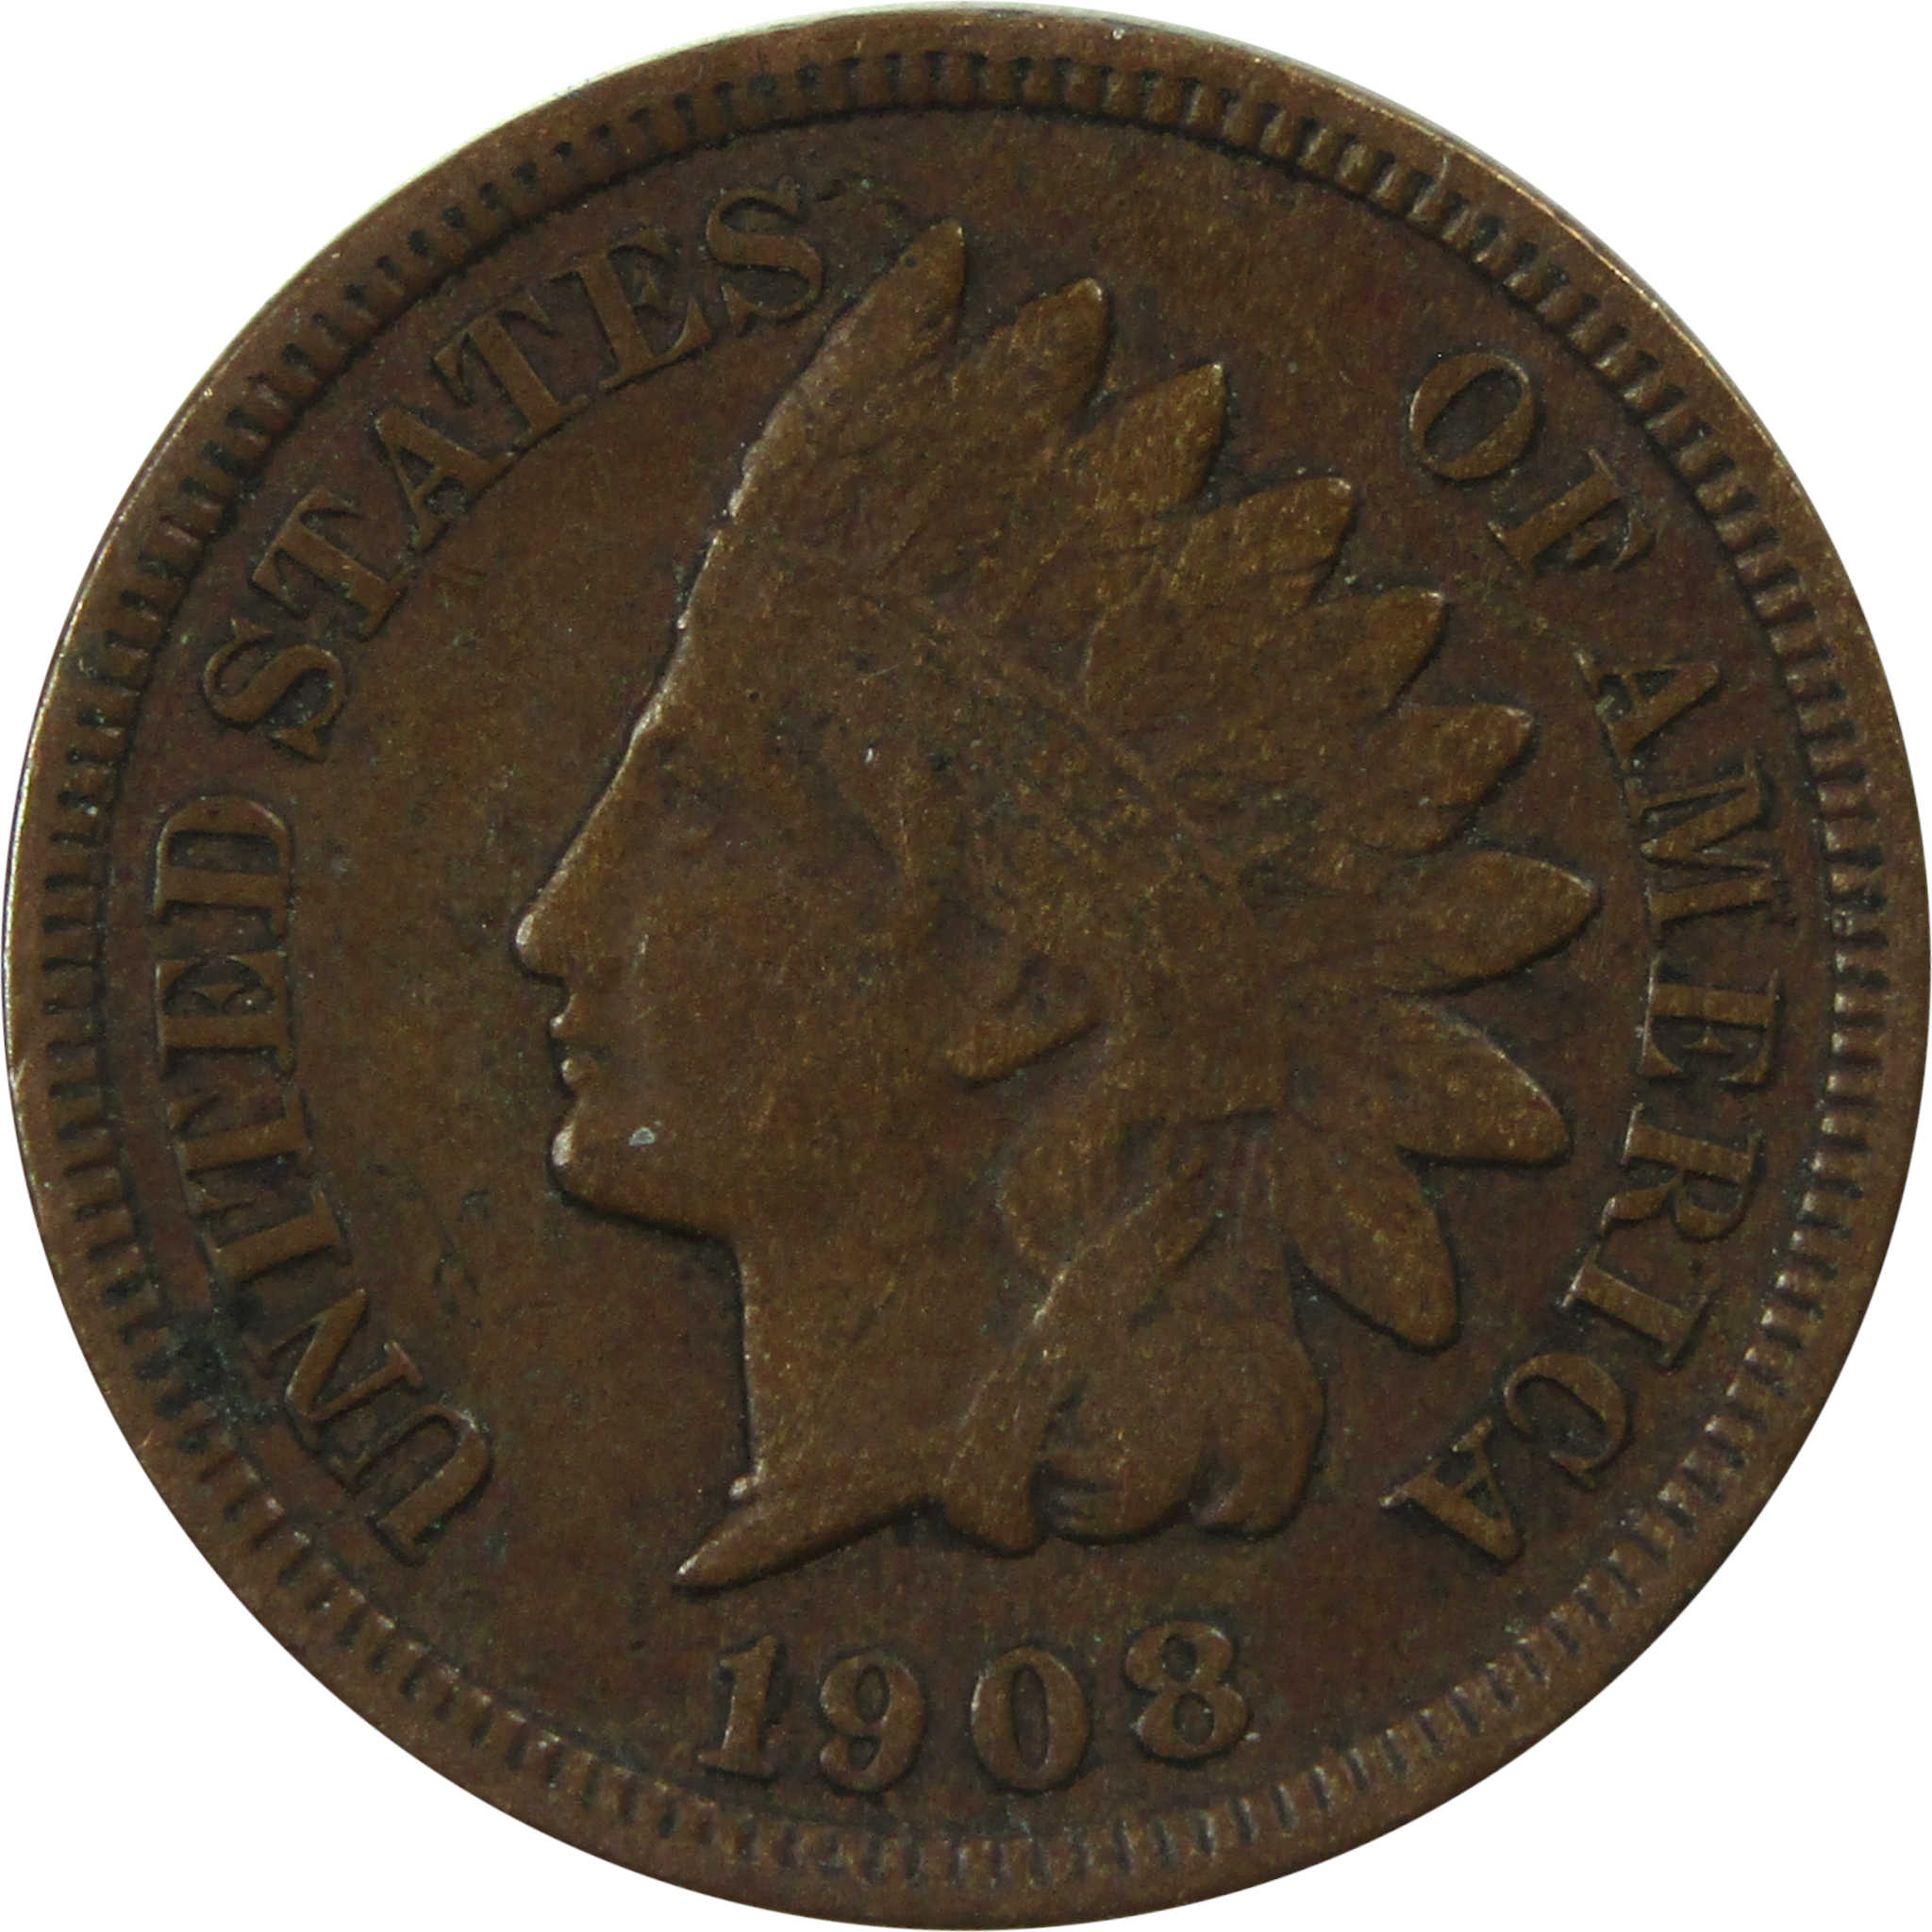 1908 S Indian Head Cent VF Very Fine Details Penny 1c Coin SKU:I13644